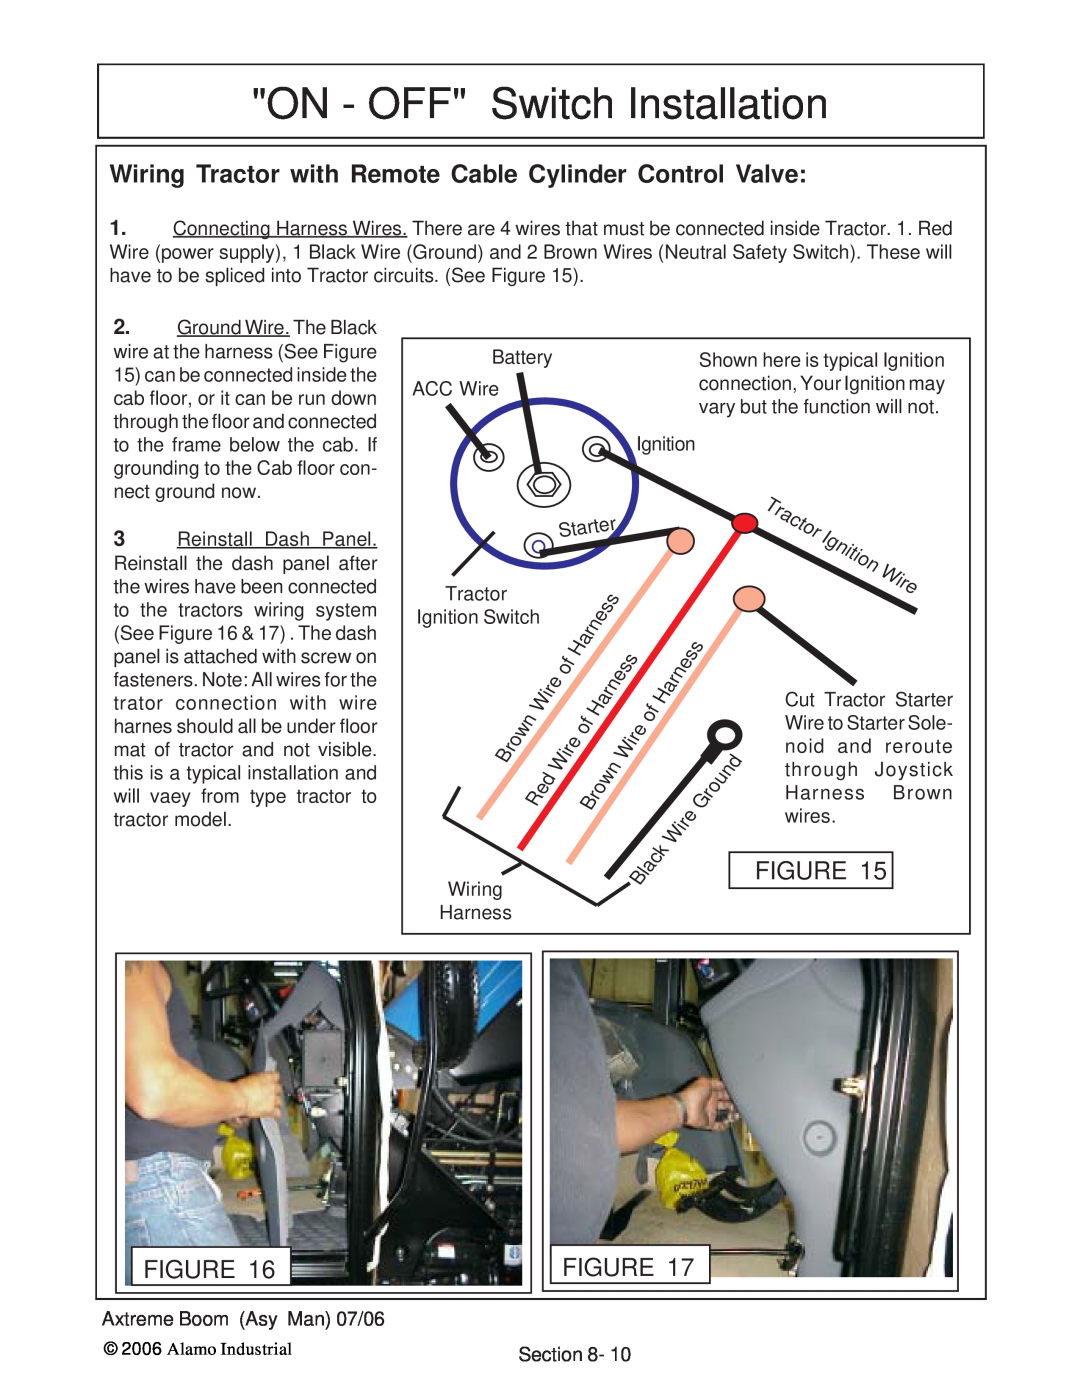 Alamo 02984405 Wiring Tractor with Remote Cable Cylinder Control Valve, ON - OFF Switch Installation, Ignition 